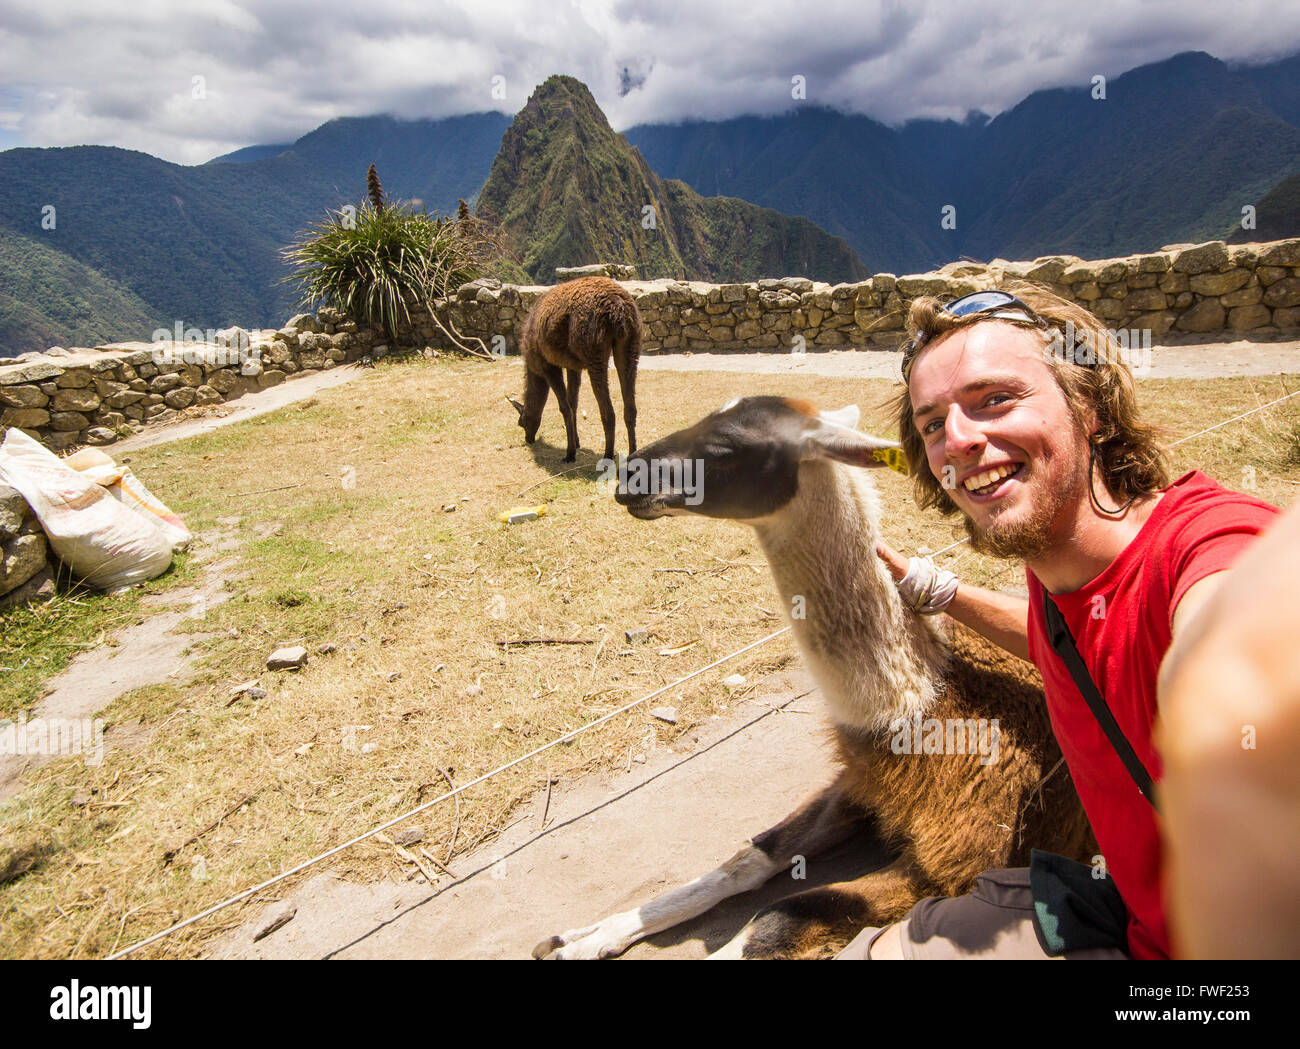 self-portrait of smiling young man in red t-short near old town of machu-picchu, peru Stock Photo